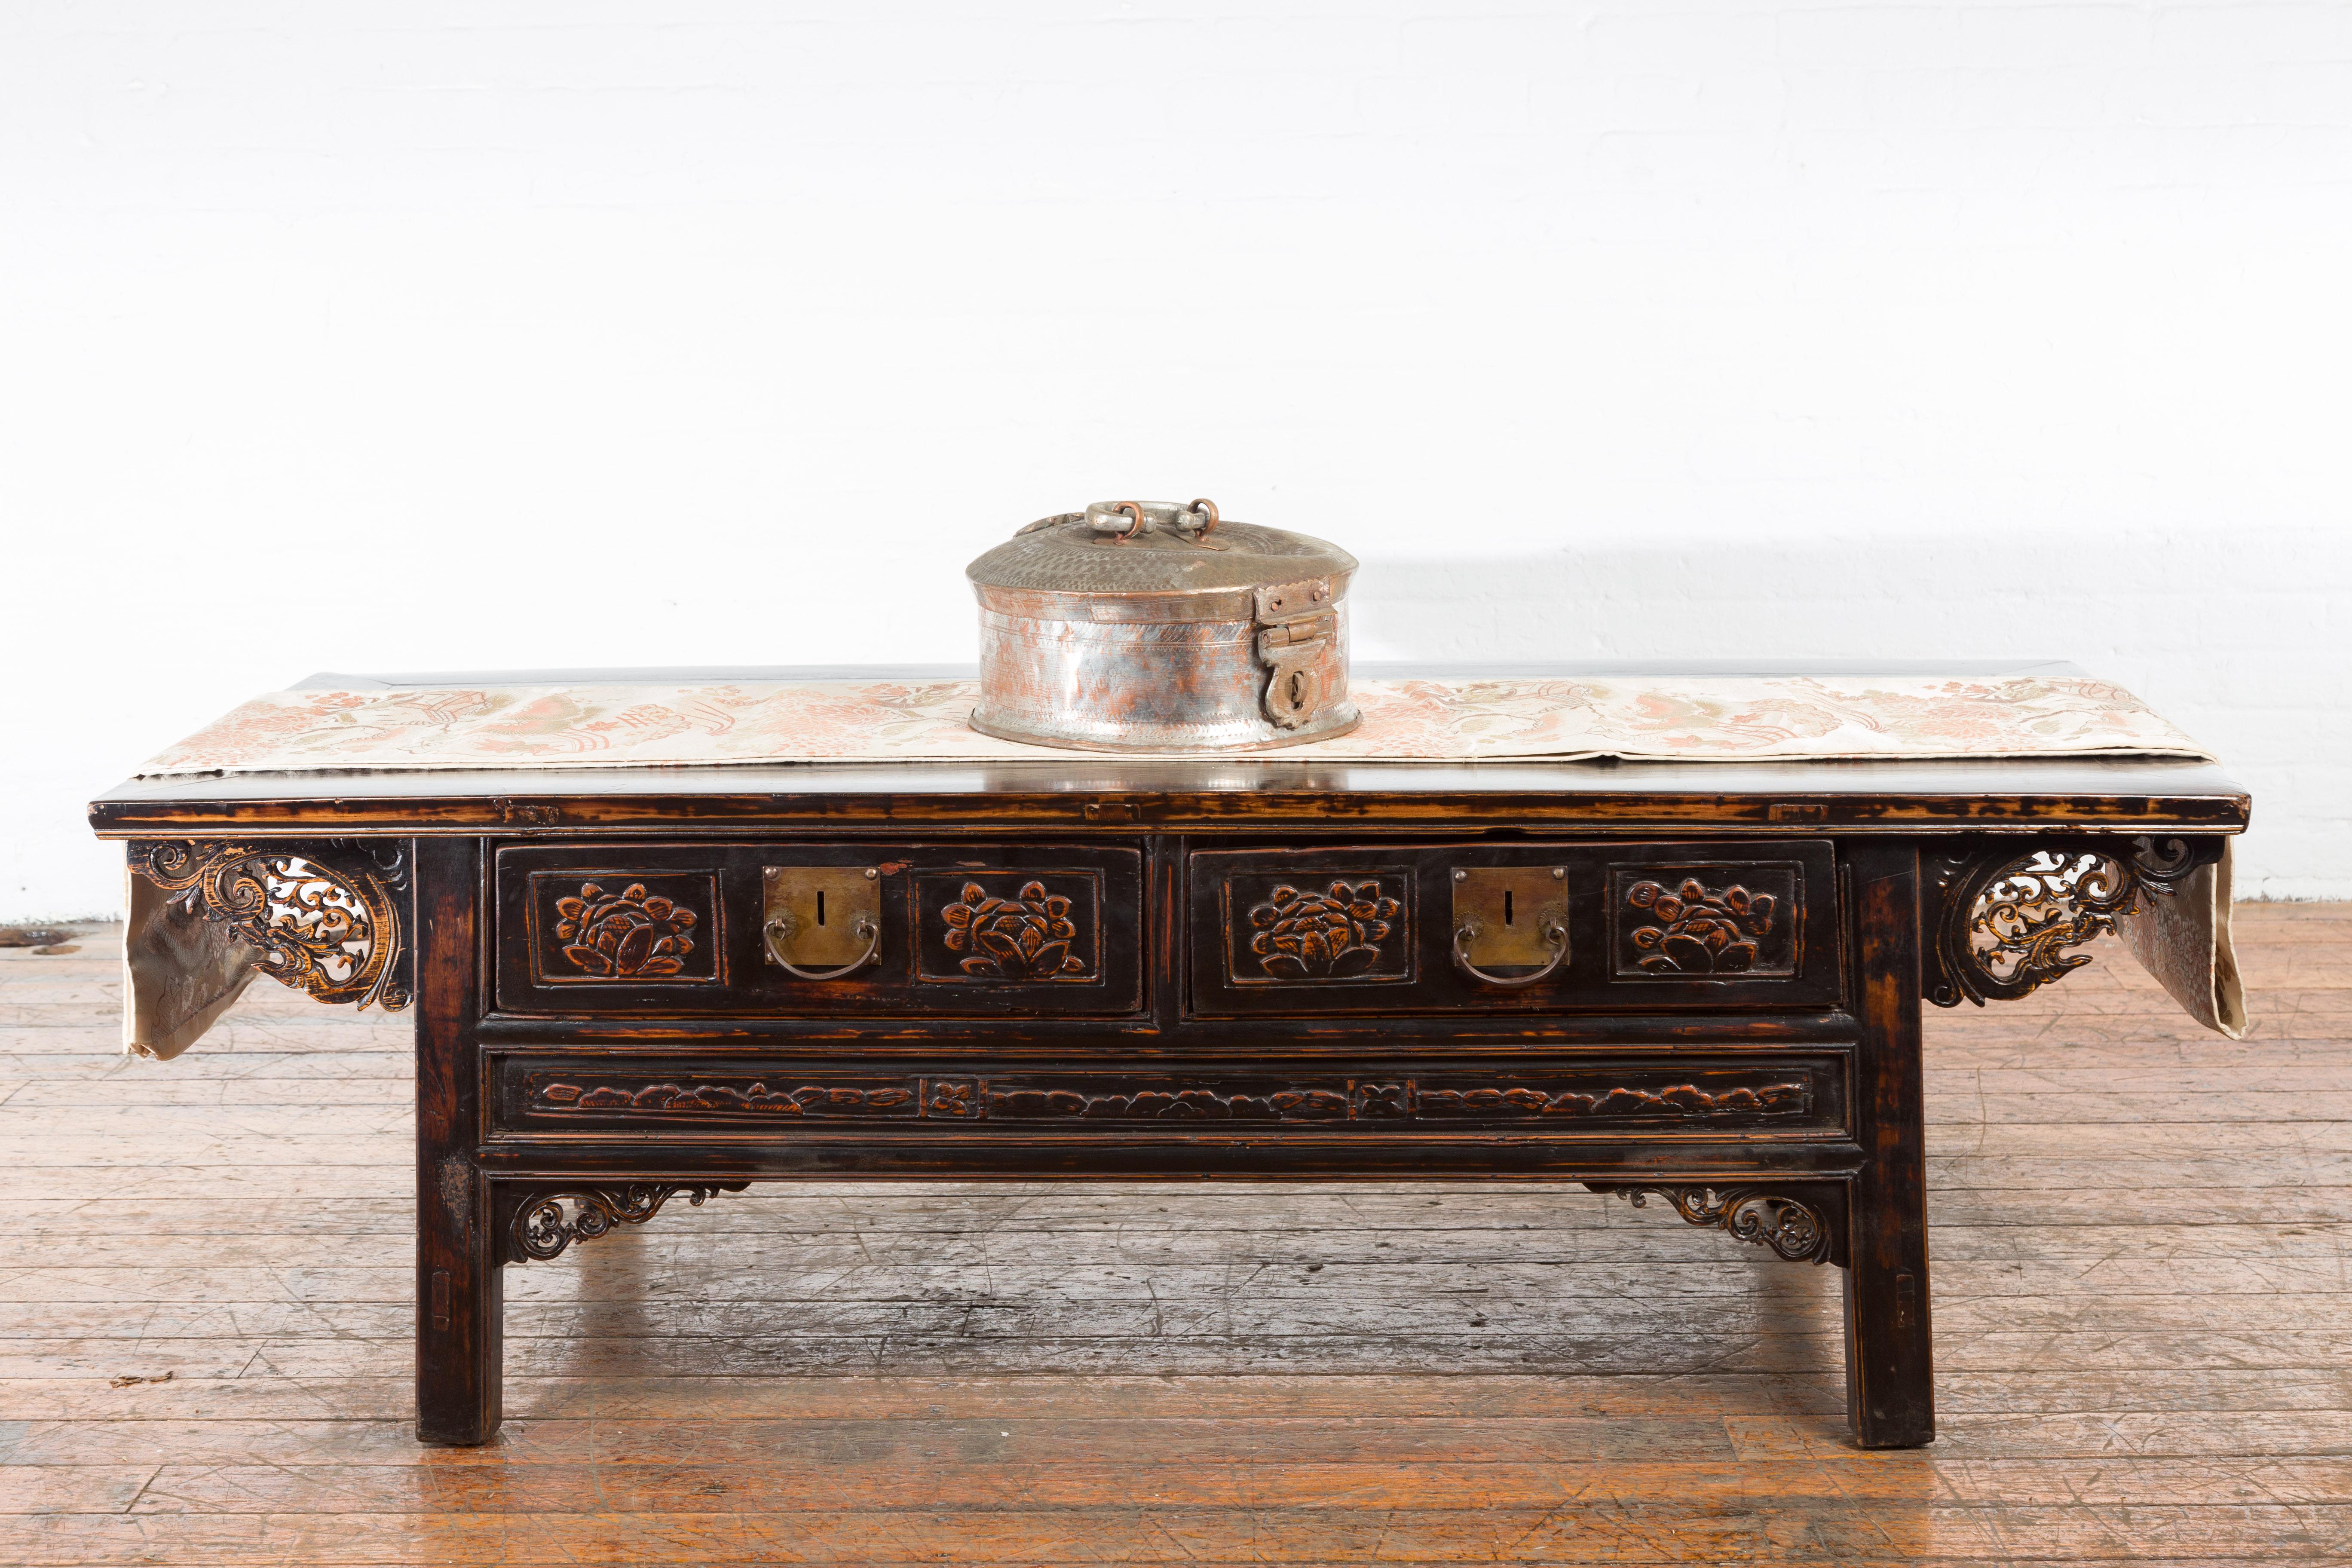 An Indian silver plate over copper box from the 19th century with top handle, lid and incised motifs. Created in India during the 19th century, this silver plate over copper box attracts our attention with its circular body adorned with incised